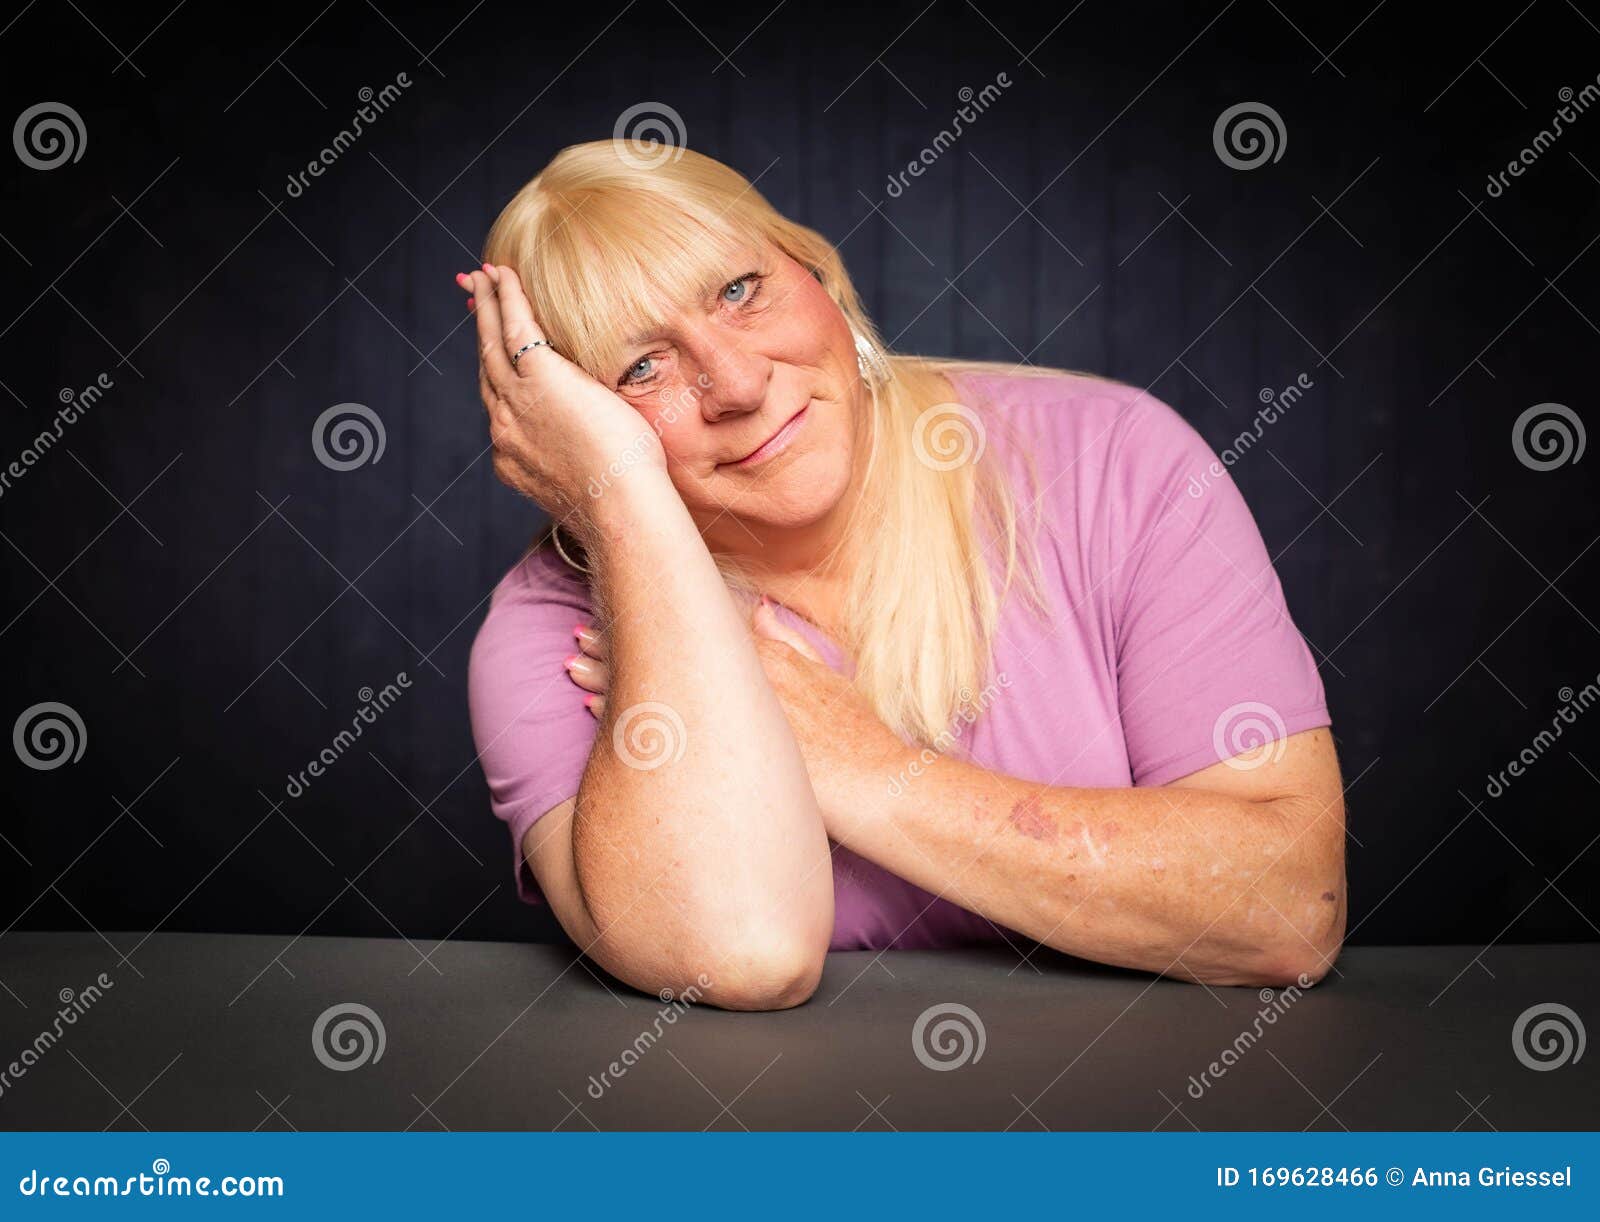 trans woman with head resting on her hand